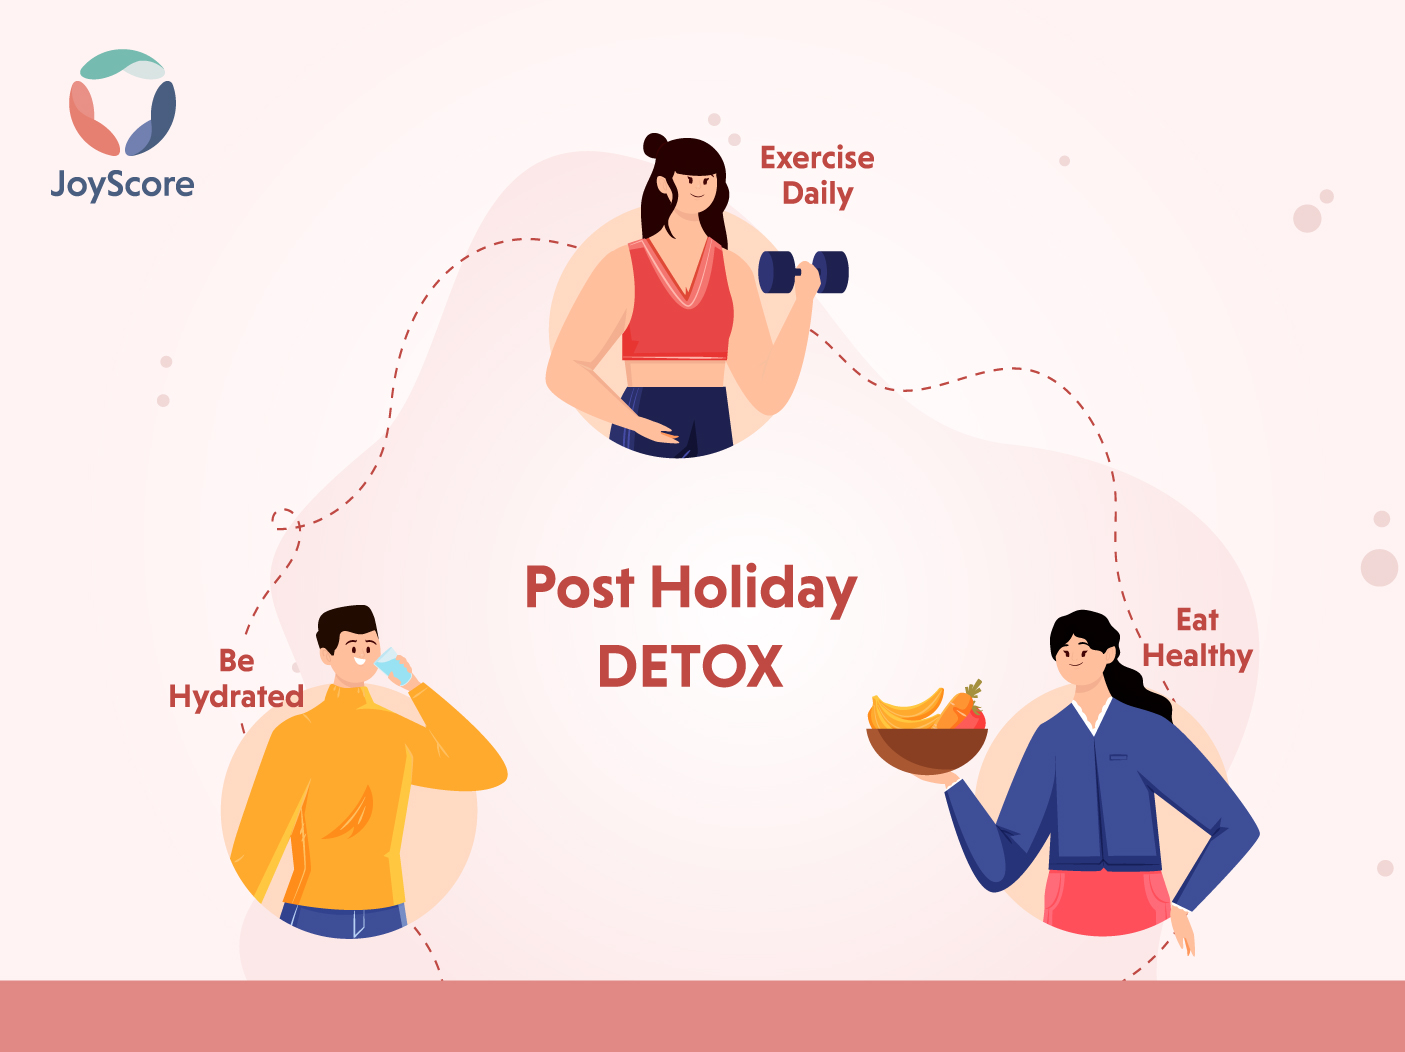 6 Simple Tips For A Post Holiday Season Detox